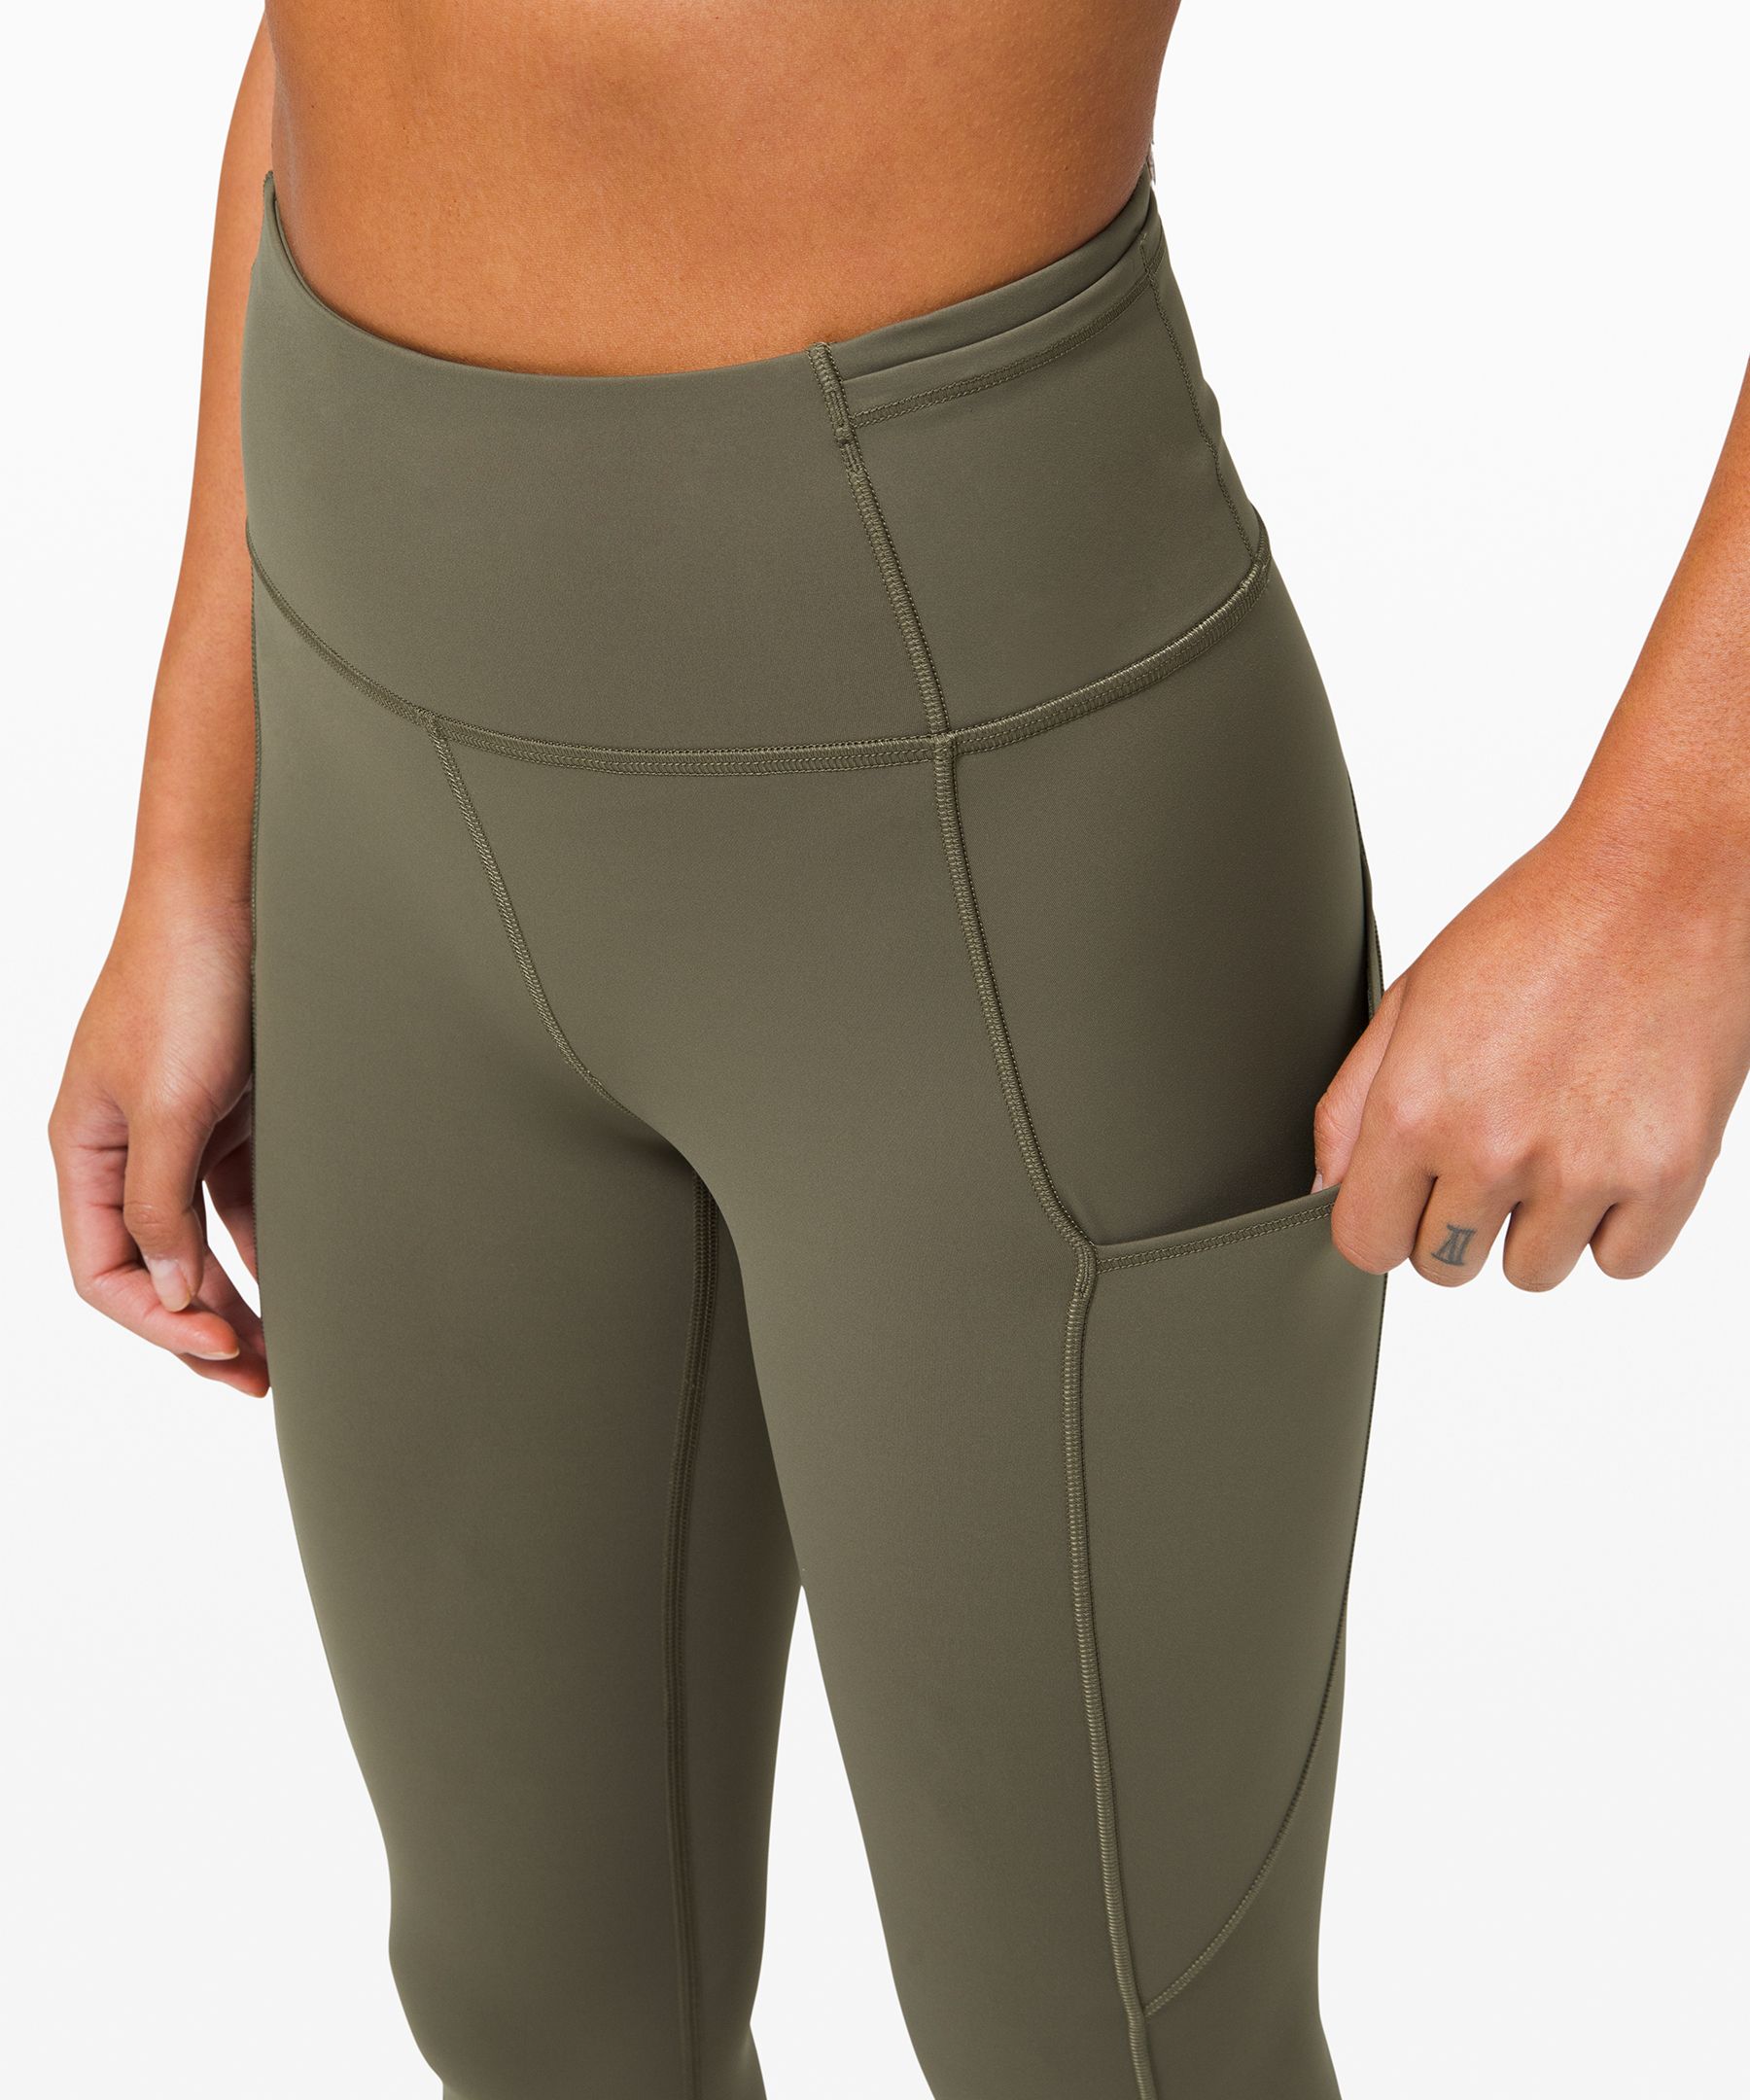 fit review: lululemon lunar new year collection 2020 release on lemon loves  blog — Be Foxy Fit - improve mobility, relieve tension, reduce stress  through mindful movement